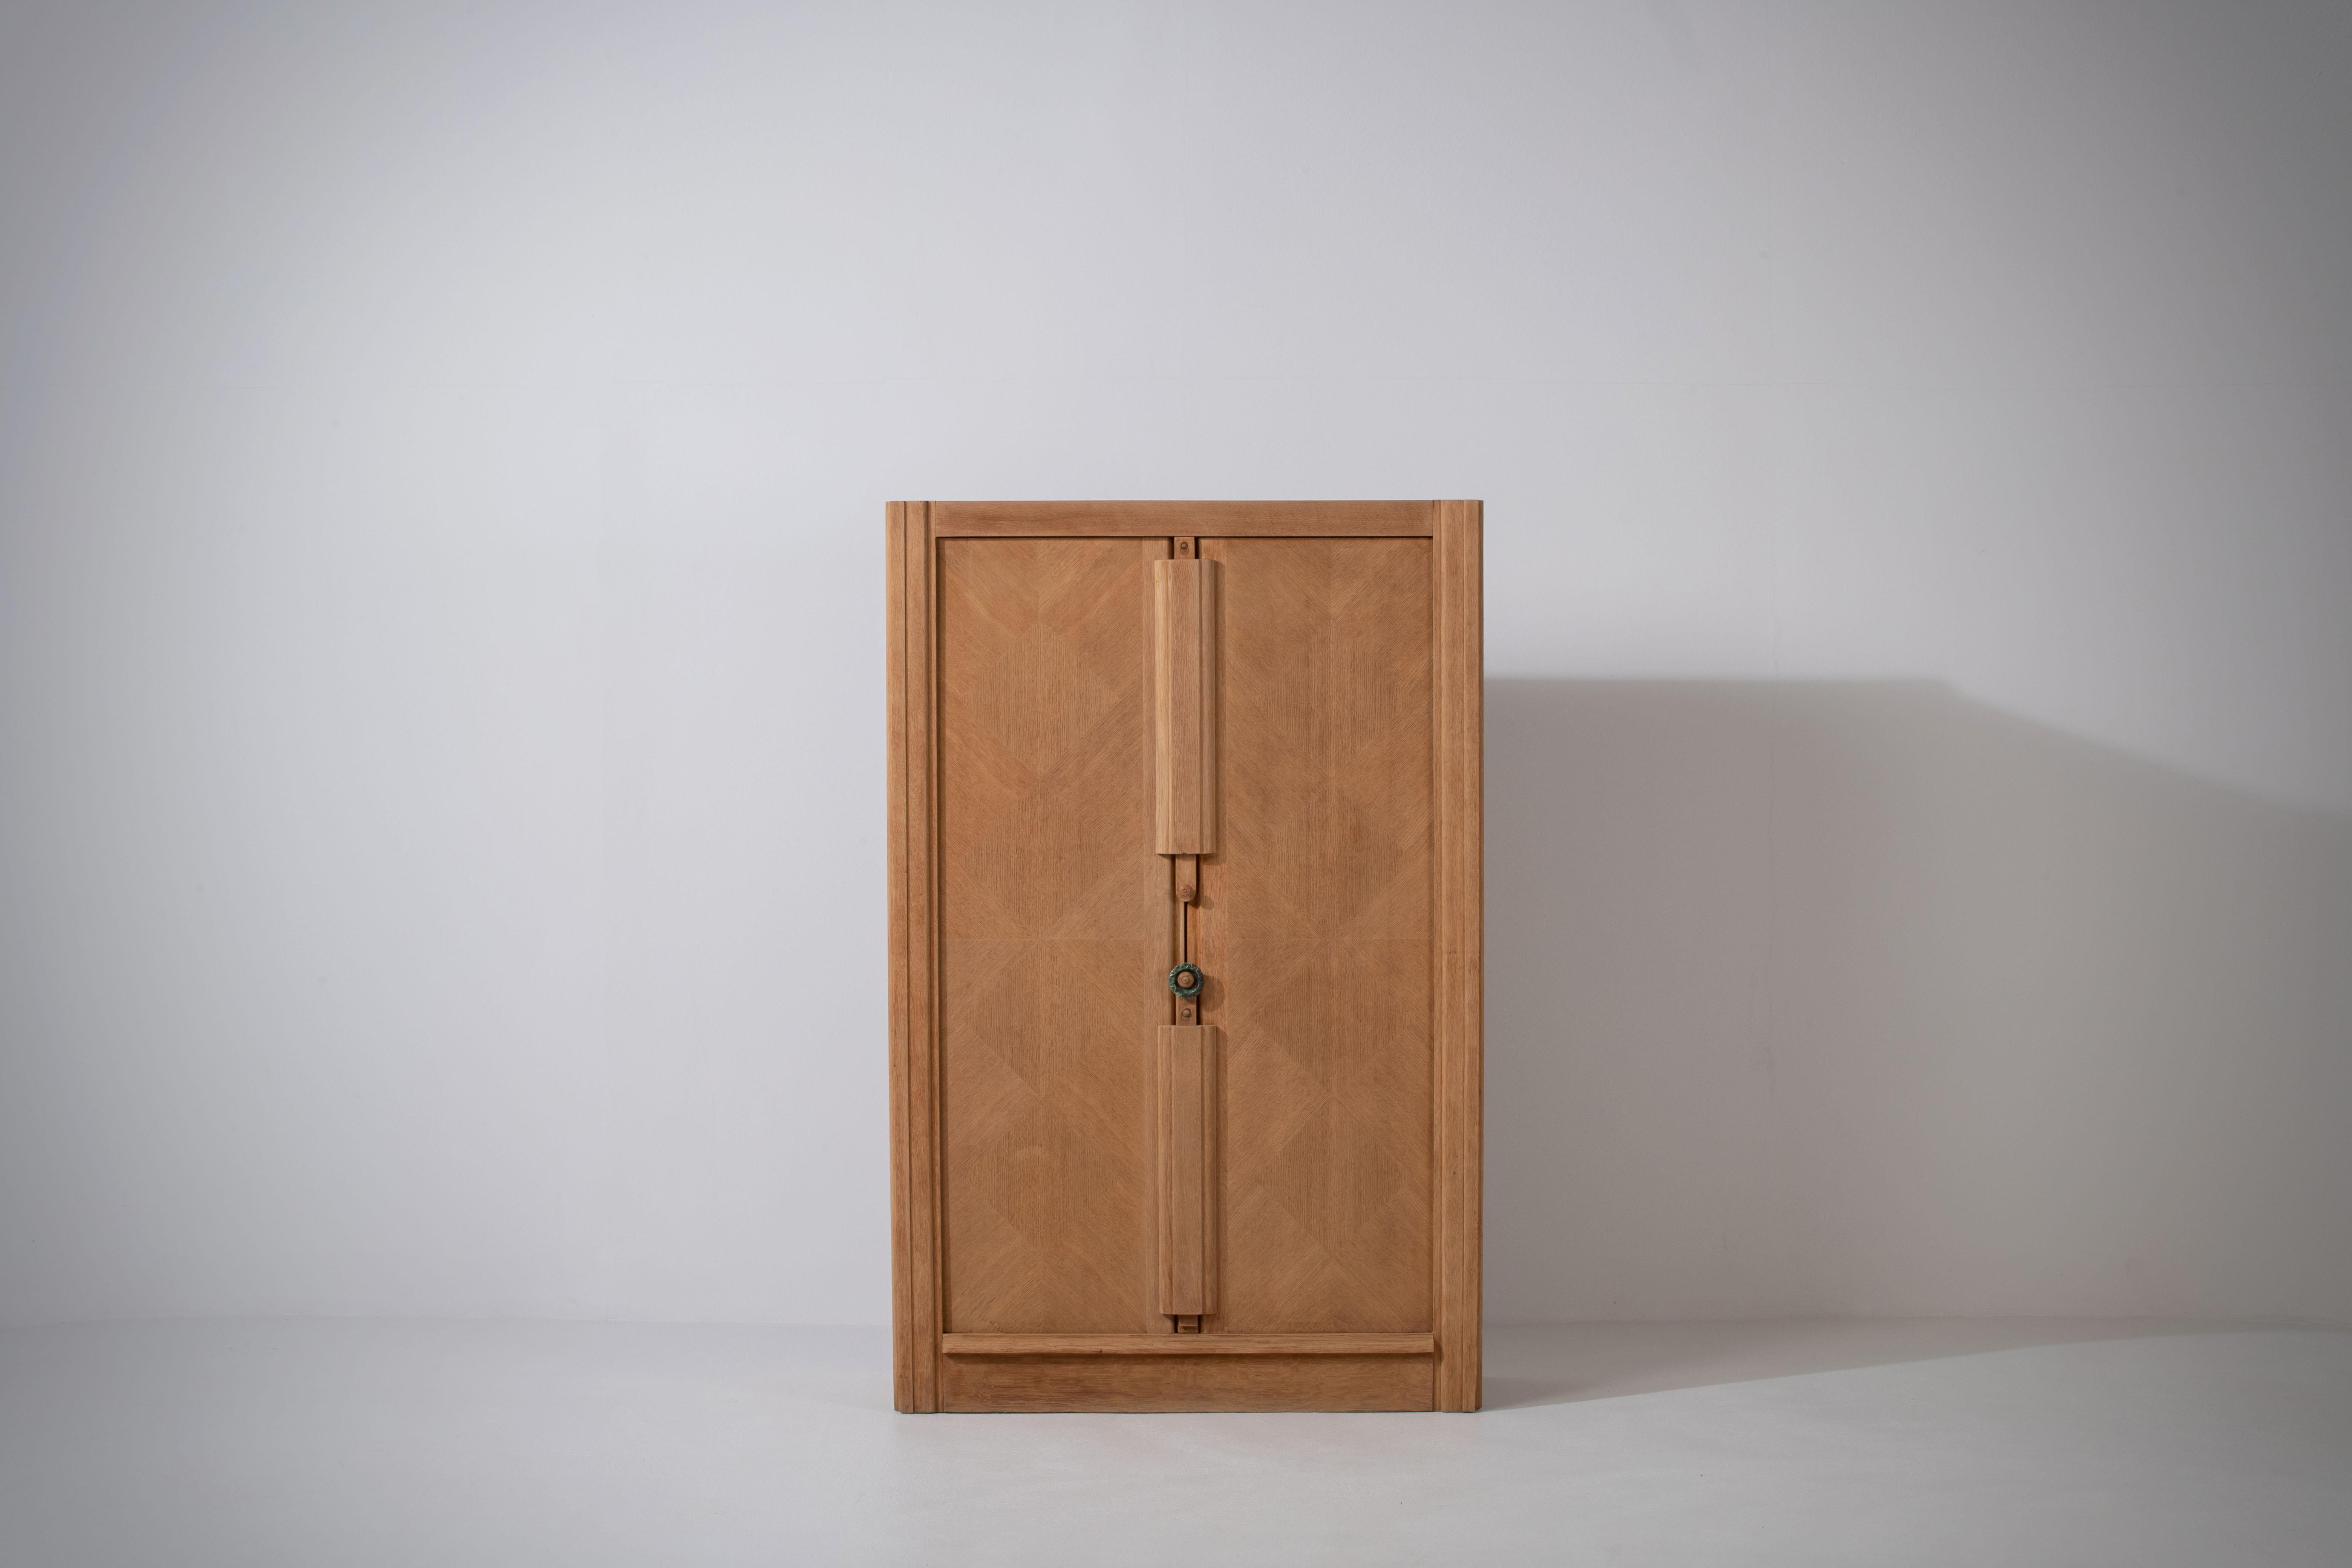 Presenting an elegant and rare wardrobe crafted by the renowned French designers Guillerme and Chambron. This iconic piece showcases their signature style and meticulous craftsmanship, making it a highly sought-after addition to any interior.

The